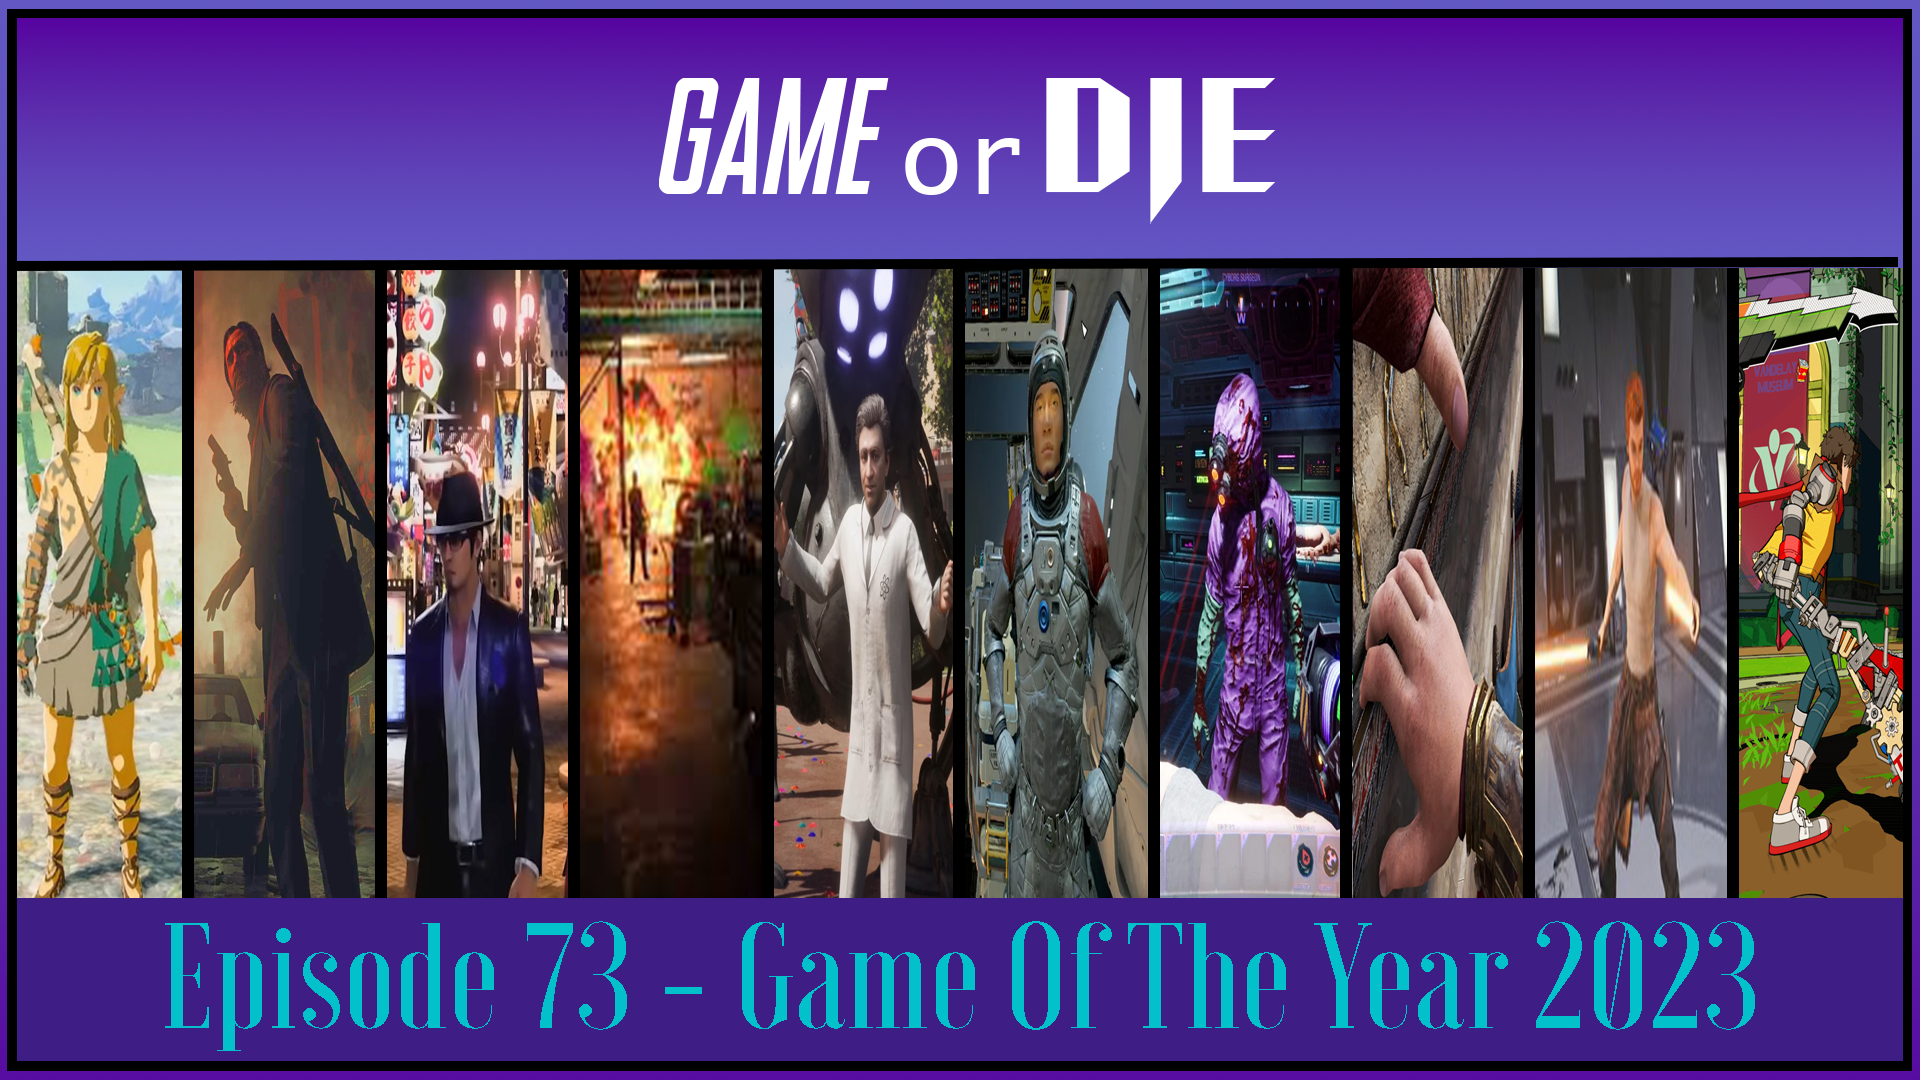 Episode 73 - Game Of The Year 2023